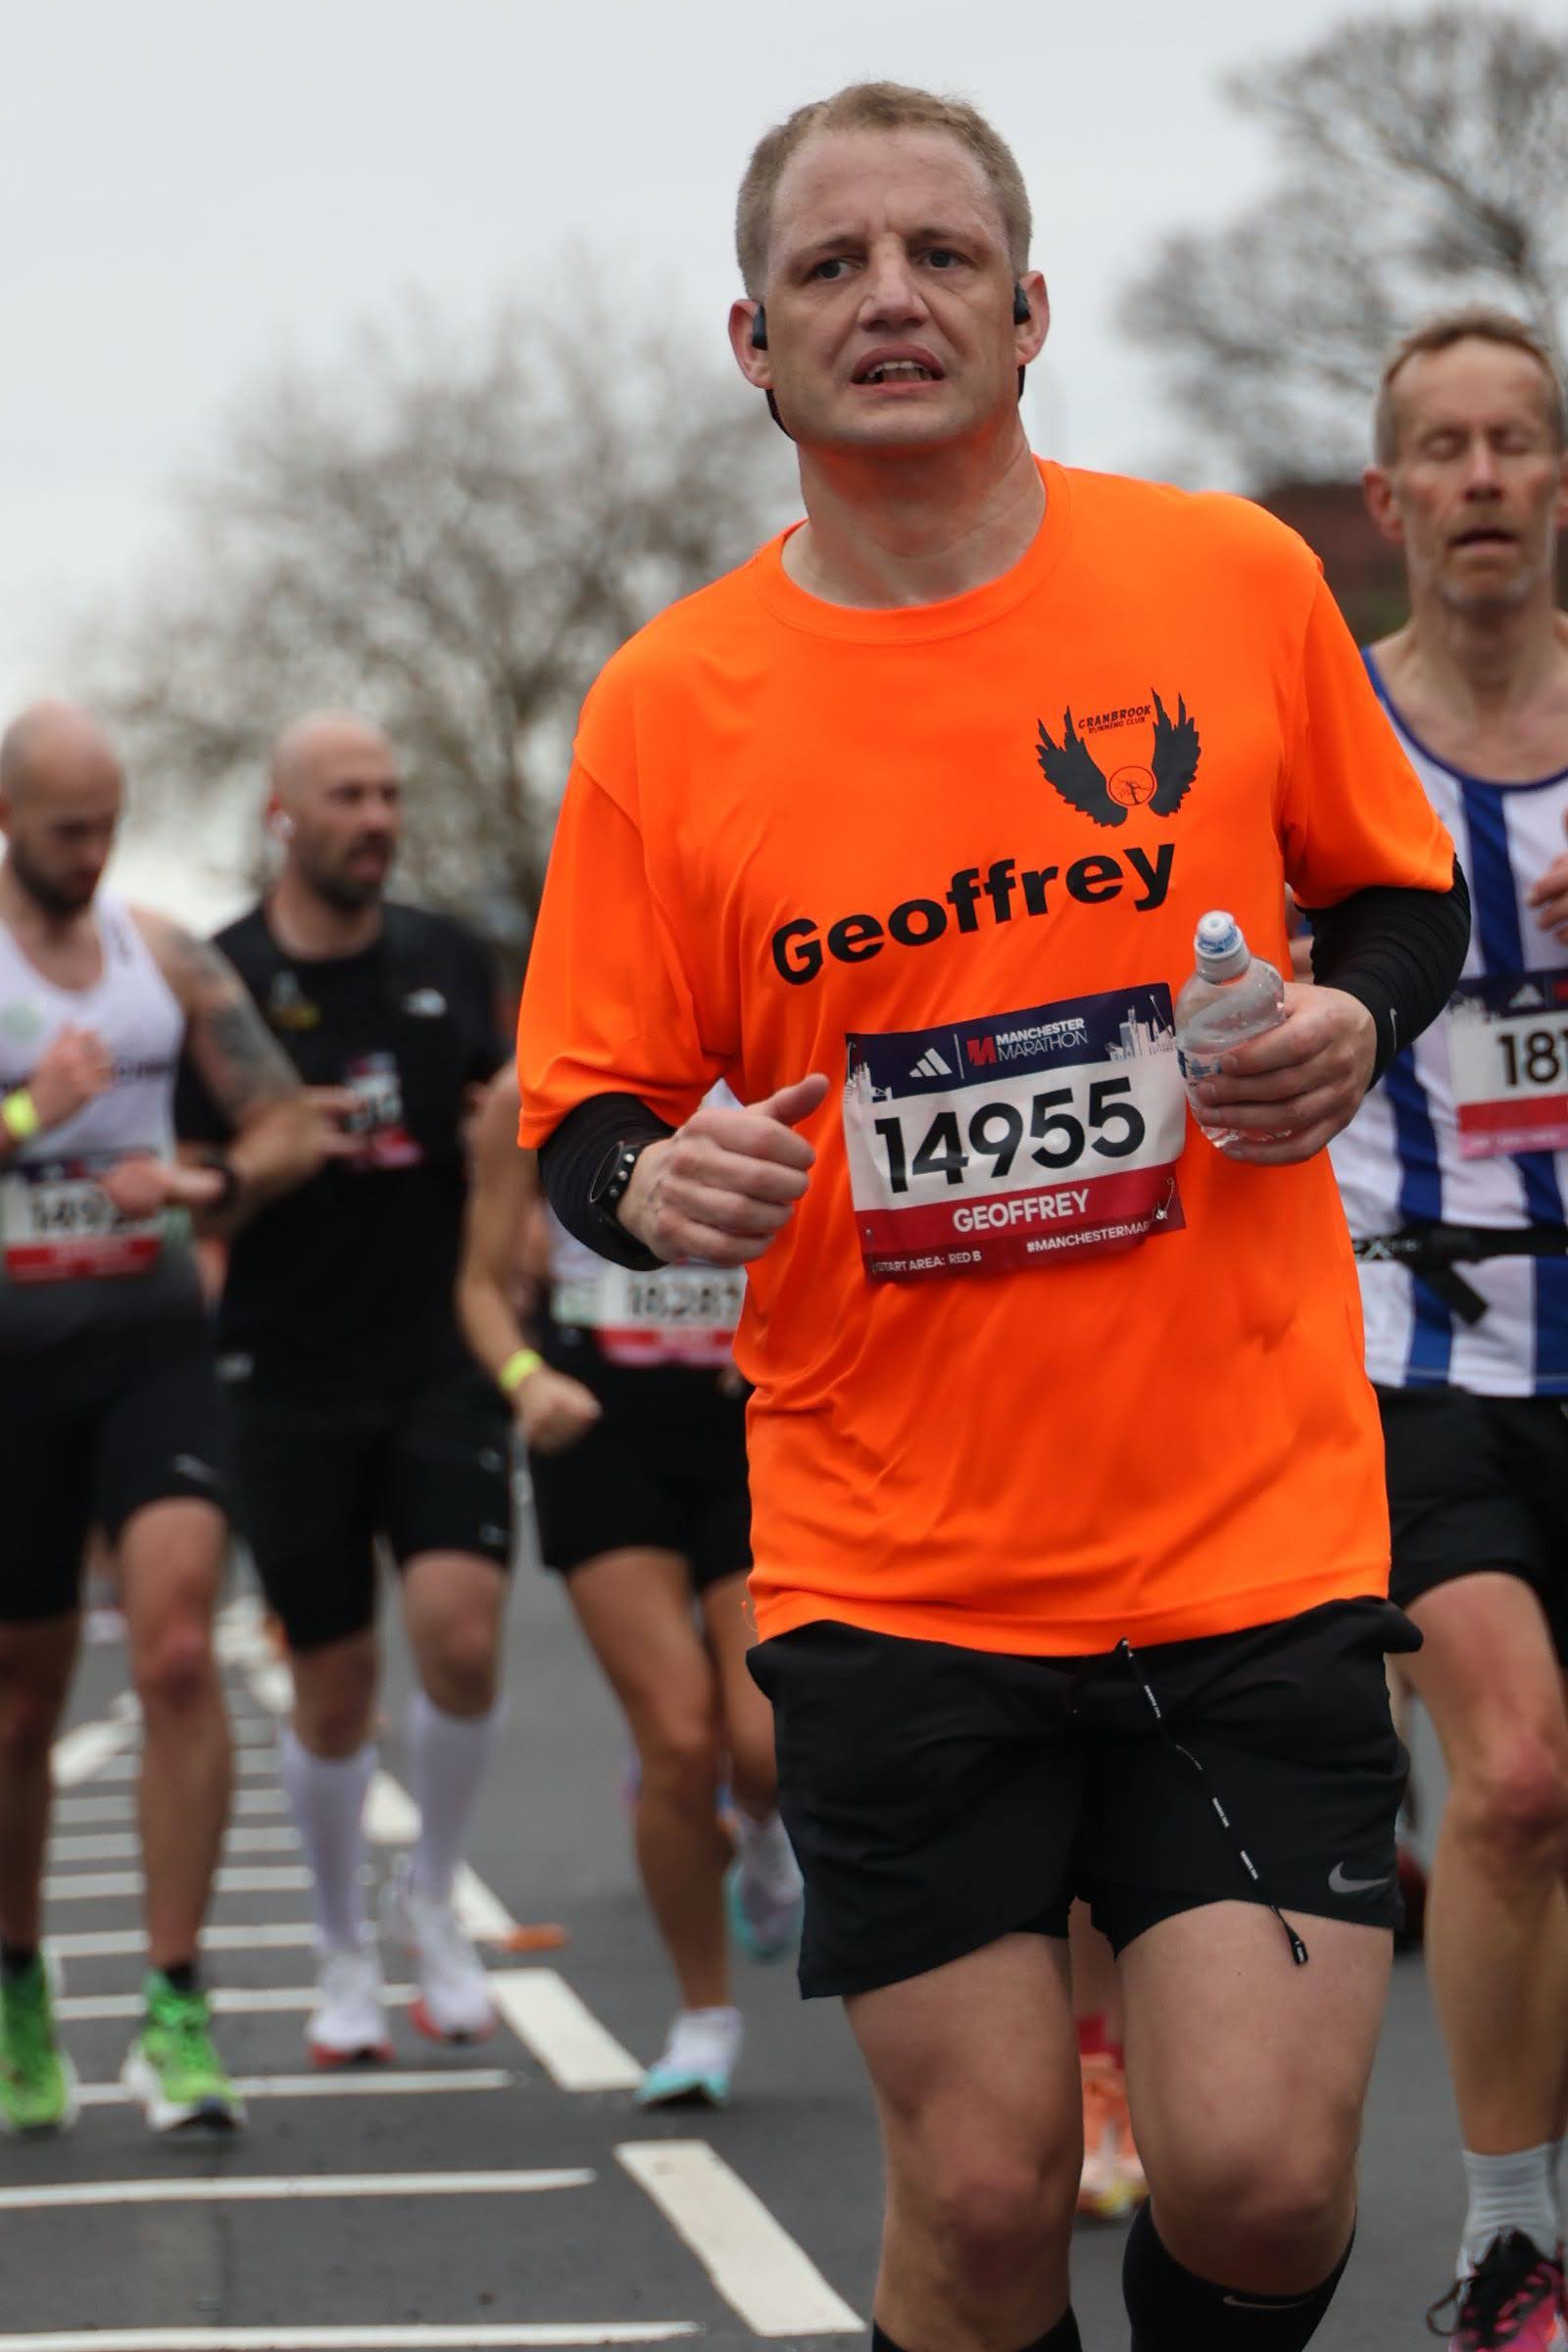 A photo of me looking warnout during the Manchester Marathon.